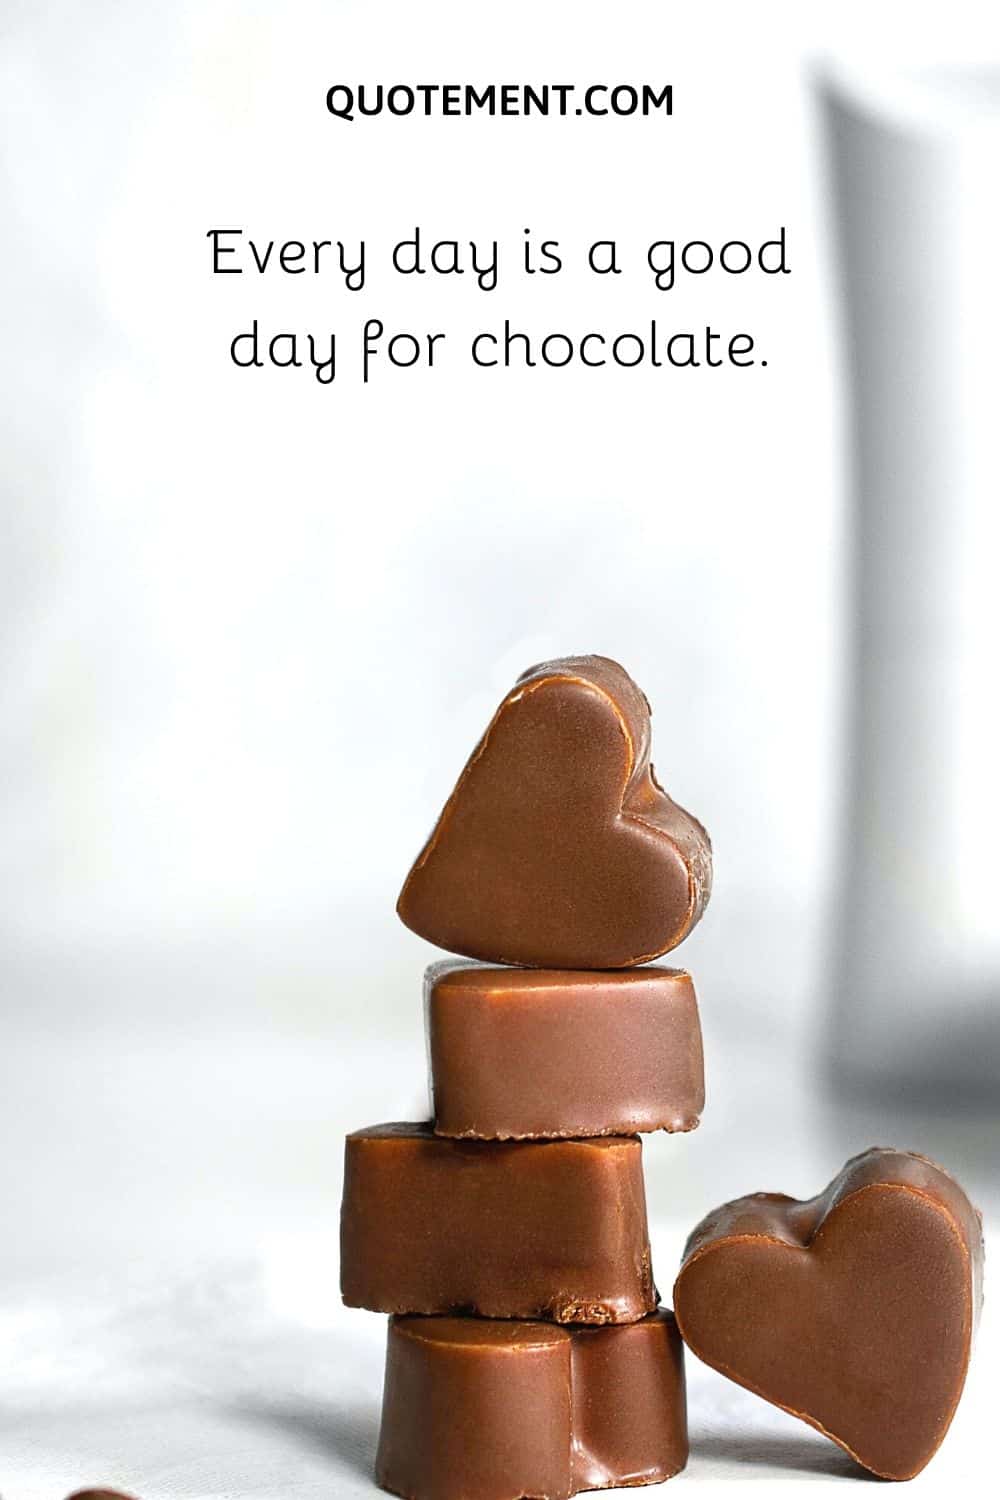 Every day is a good day for chocolate.